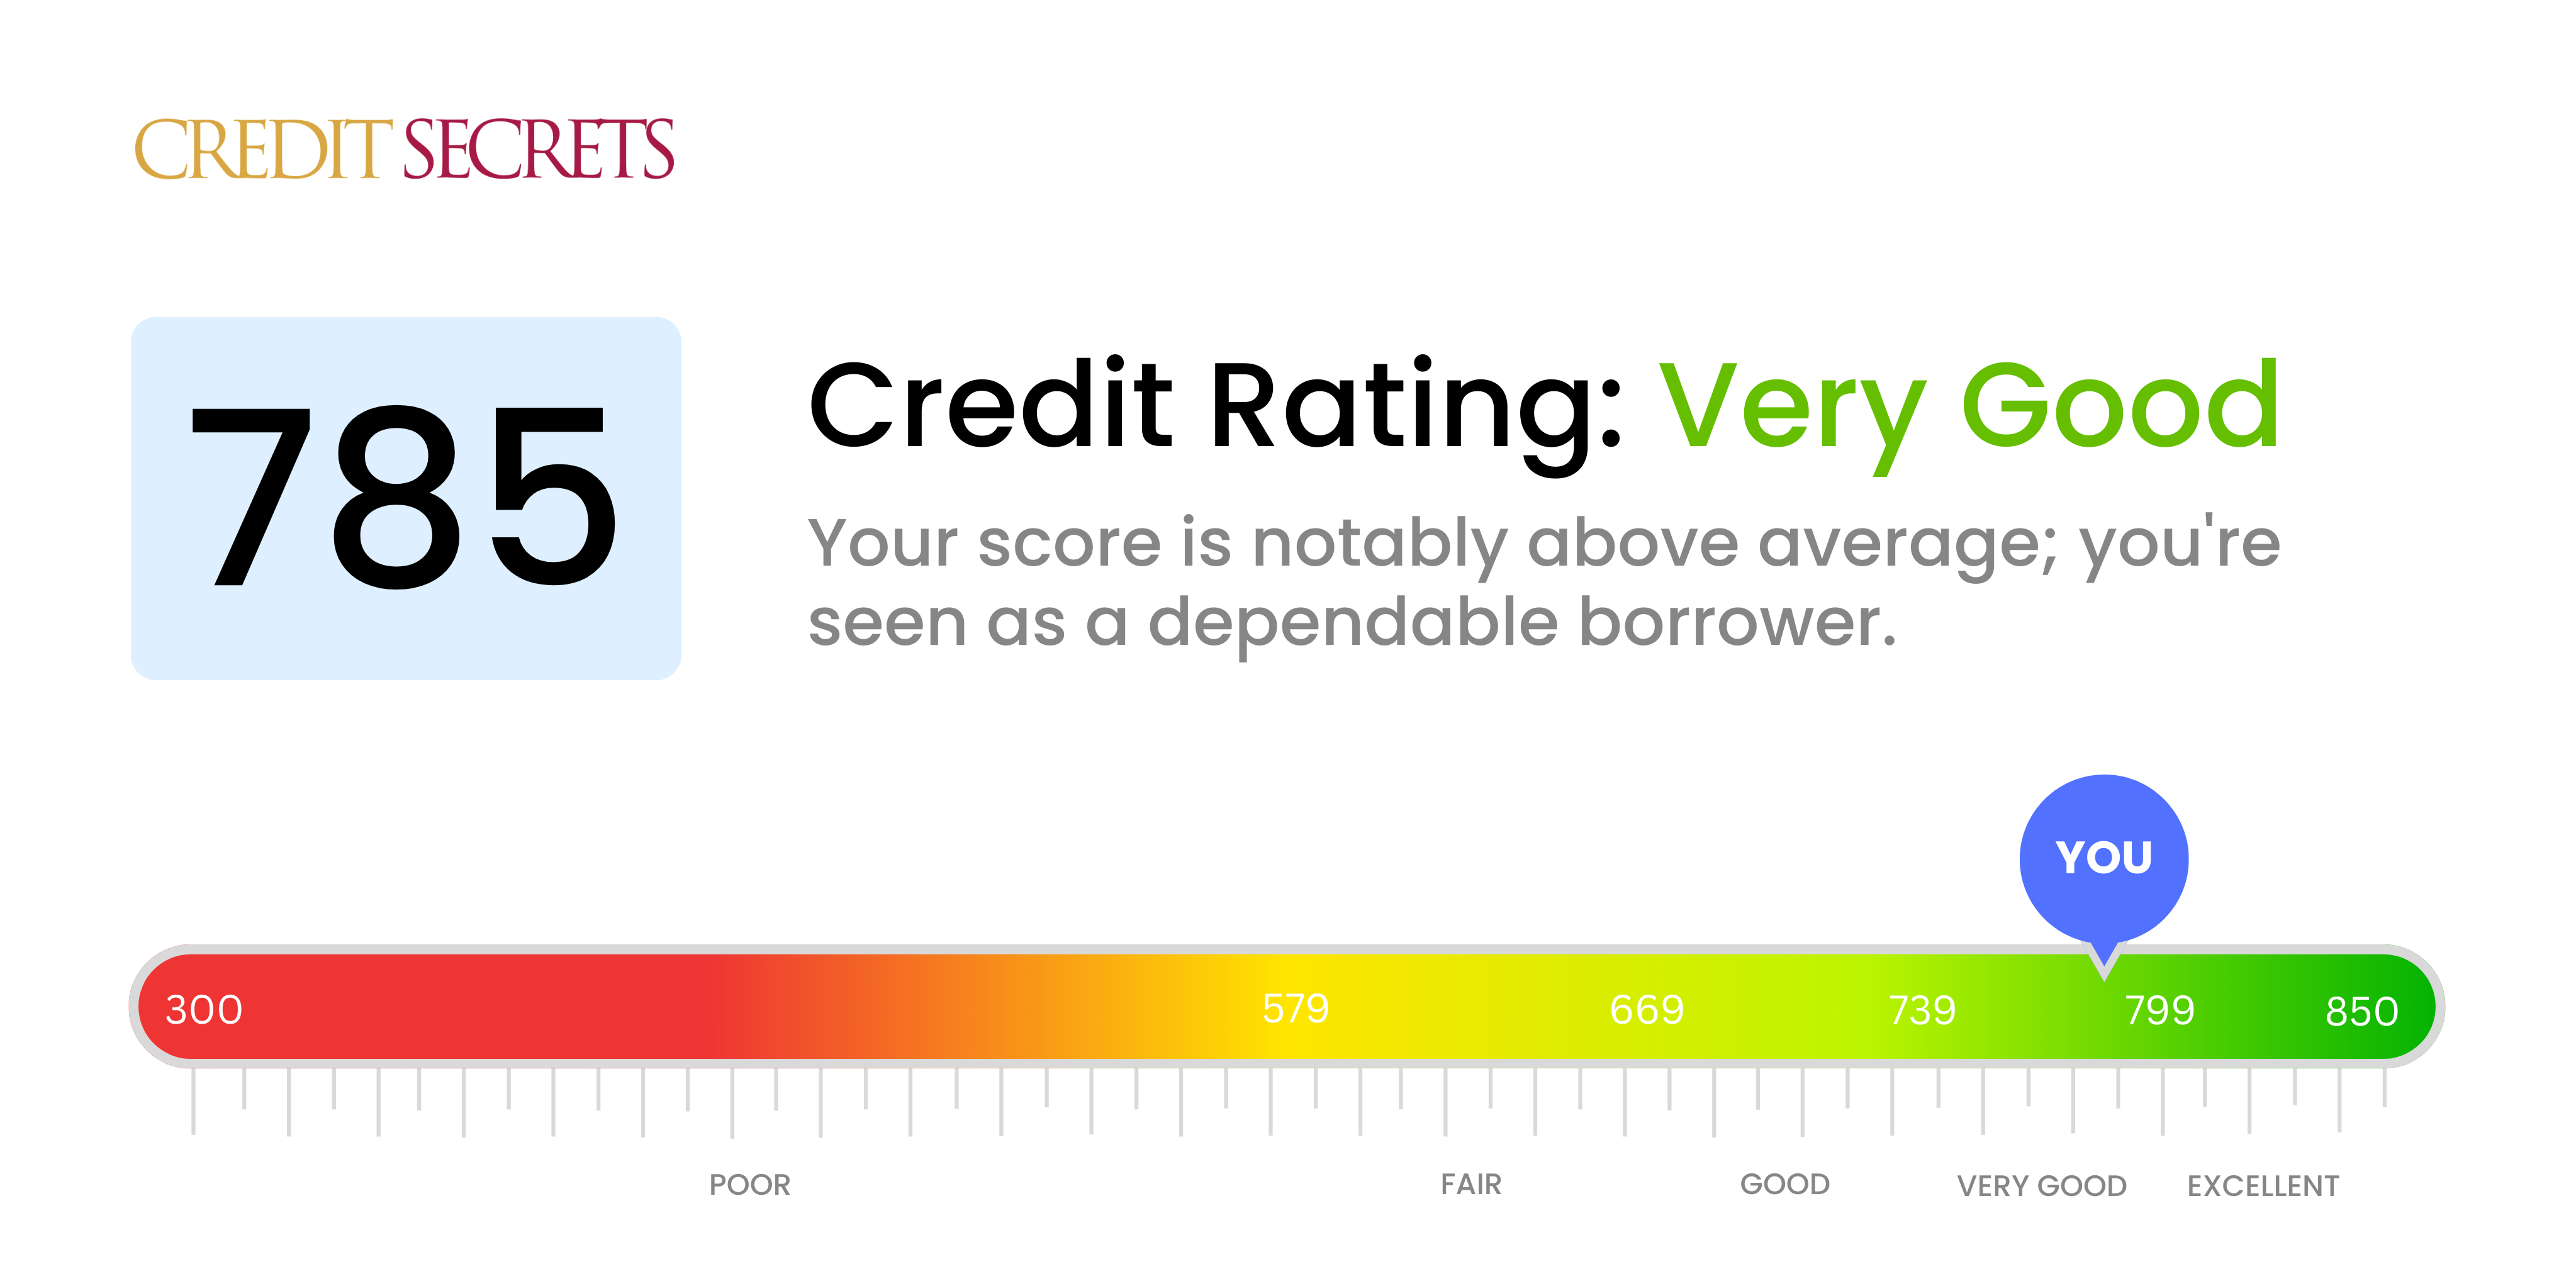 Is 785 a good credit score?